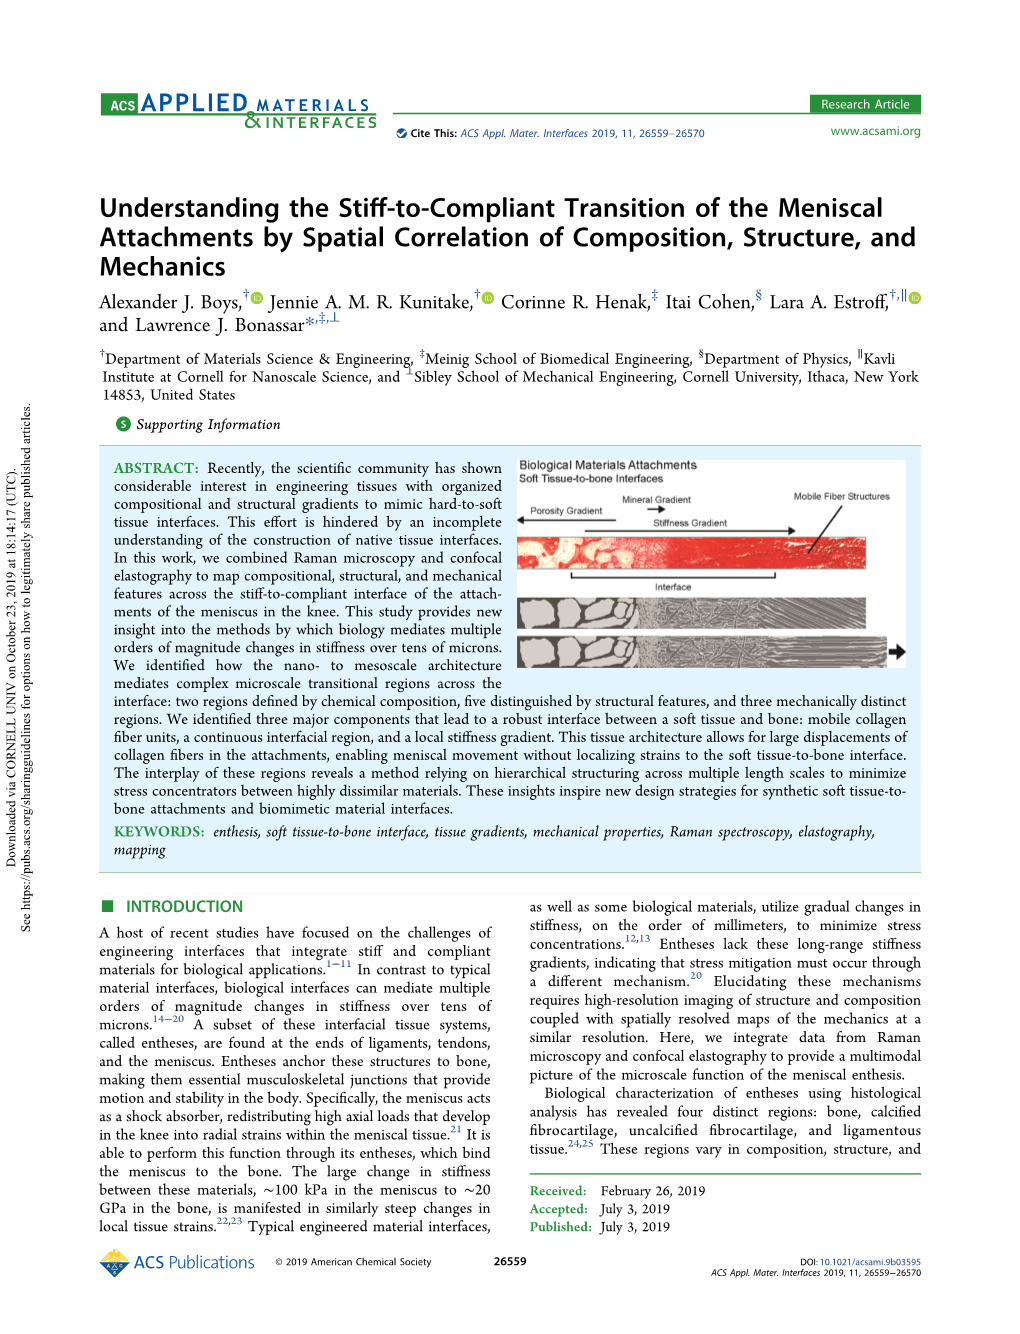 Understanding the Stiff-To-Compliant Transition of the Meniscal